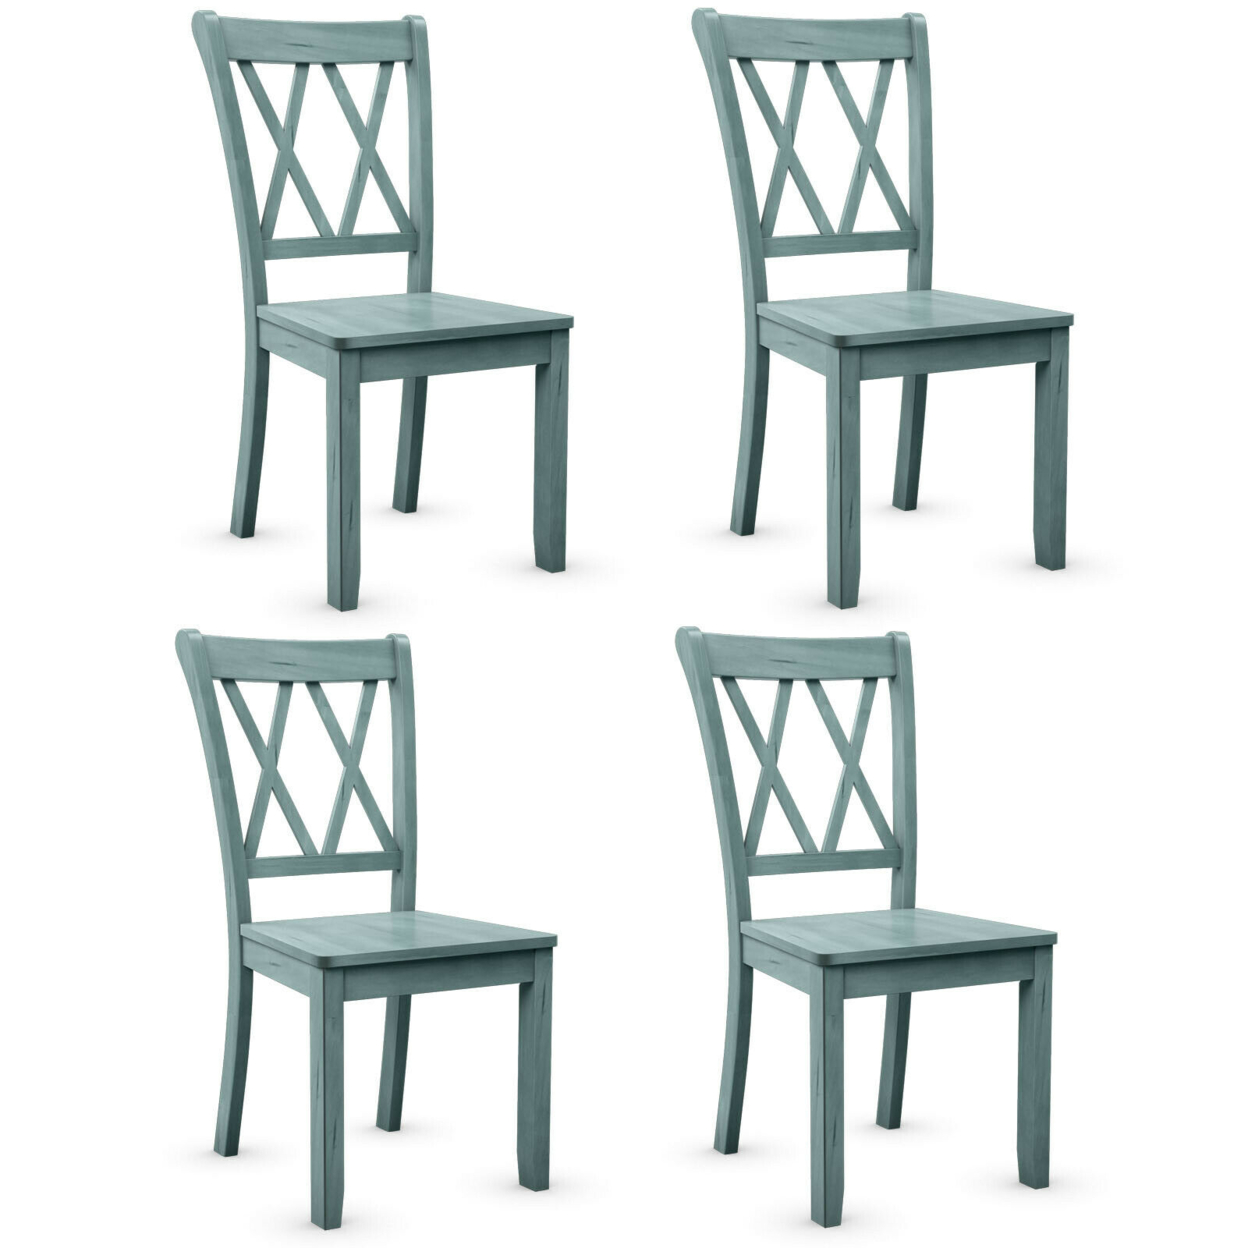 Set Of 4 Wooden Dining Side Chair Armless Chair Home Kitchen Mint Green